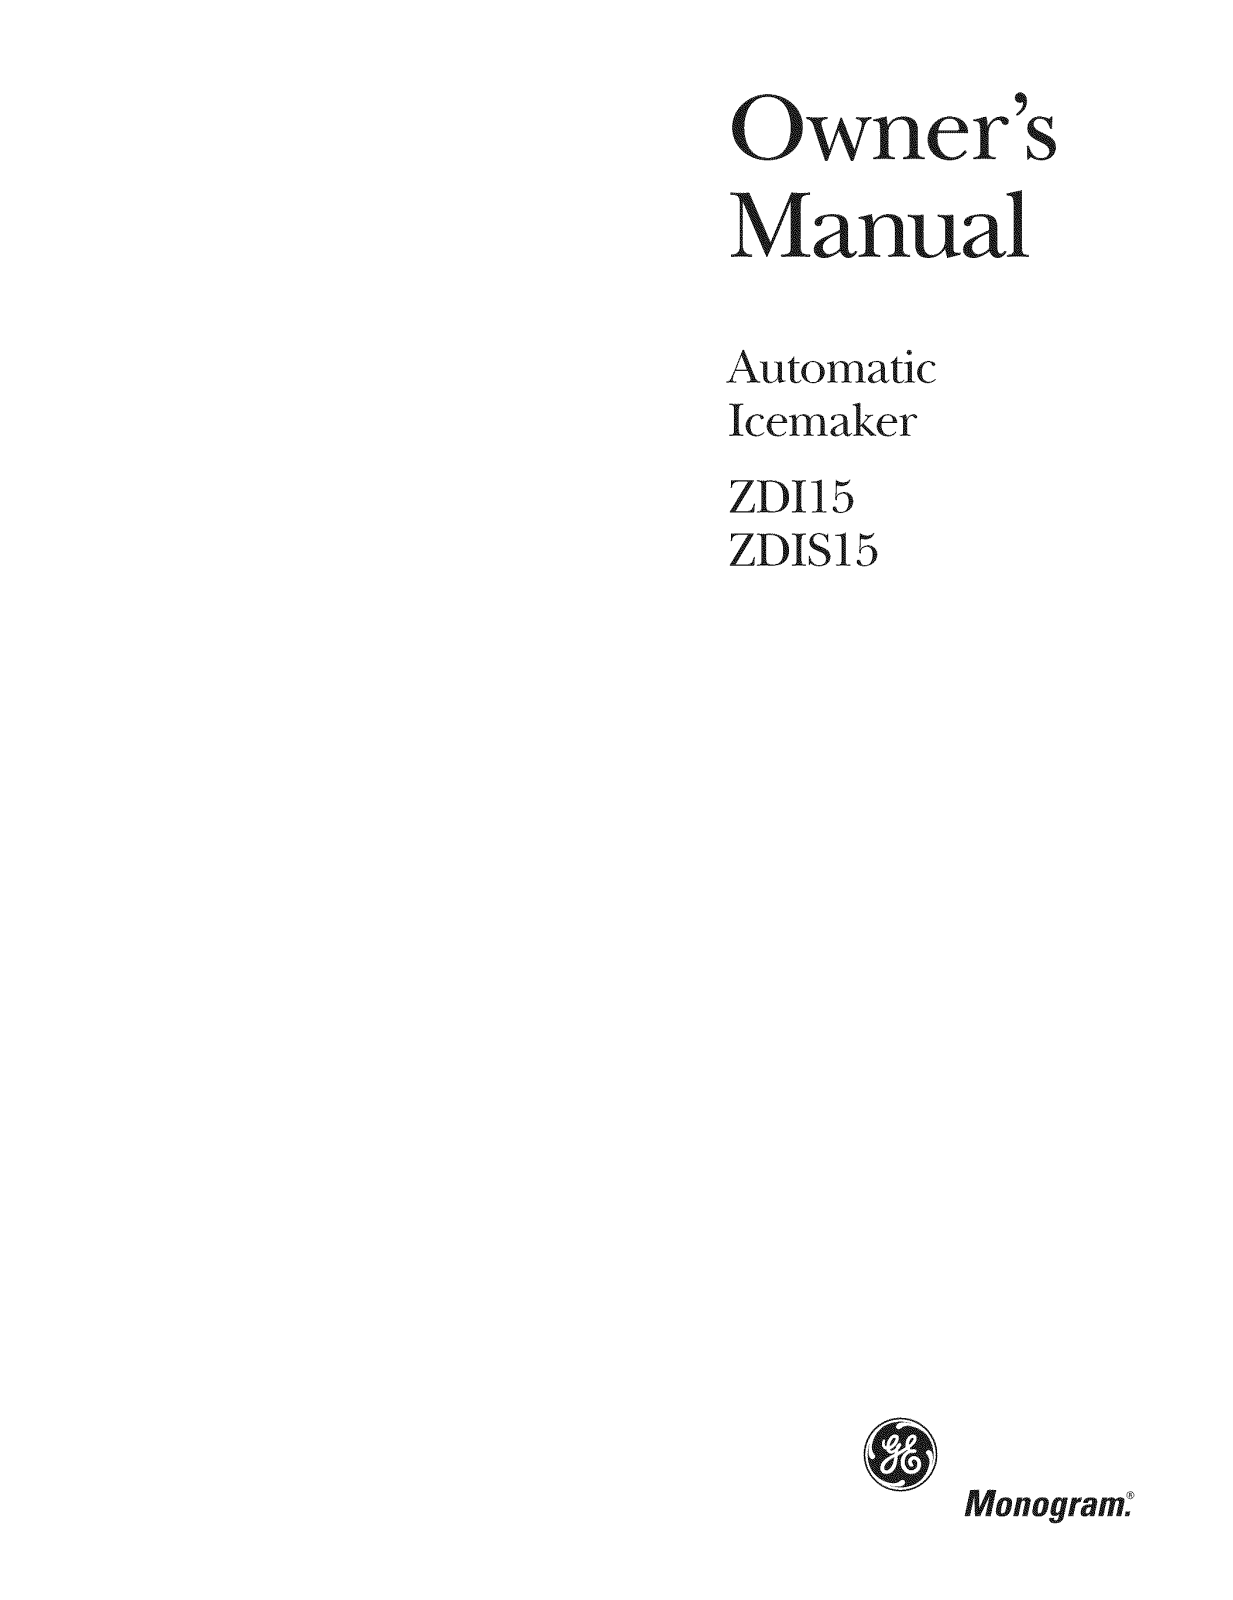 GE ZDIS15CSSP, ZDIS15CSSN, ZDIS15CSSJ, ZDIS15CSSH, ZDIS15CSSG Owner’s Manual